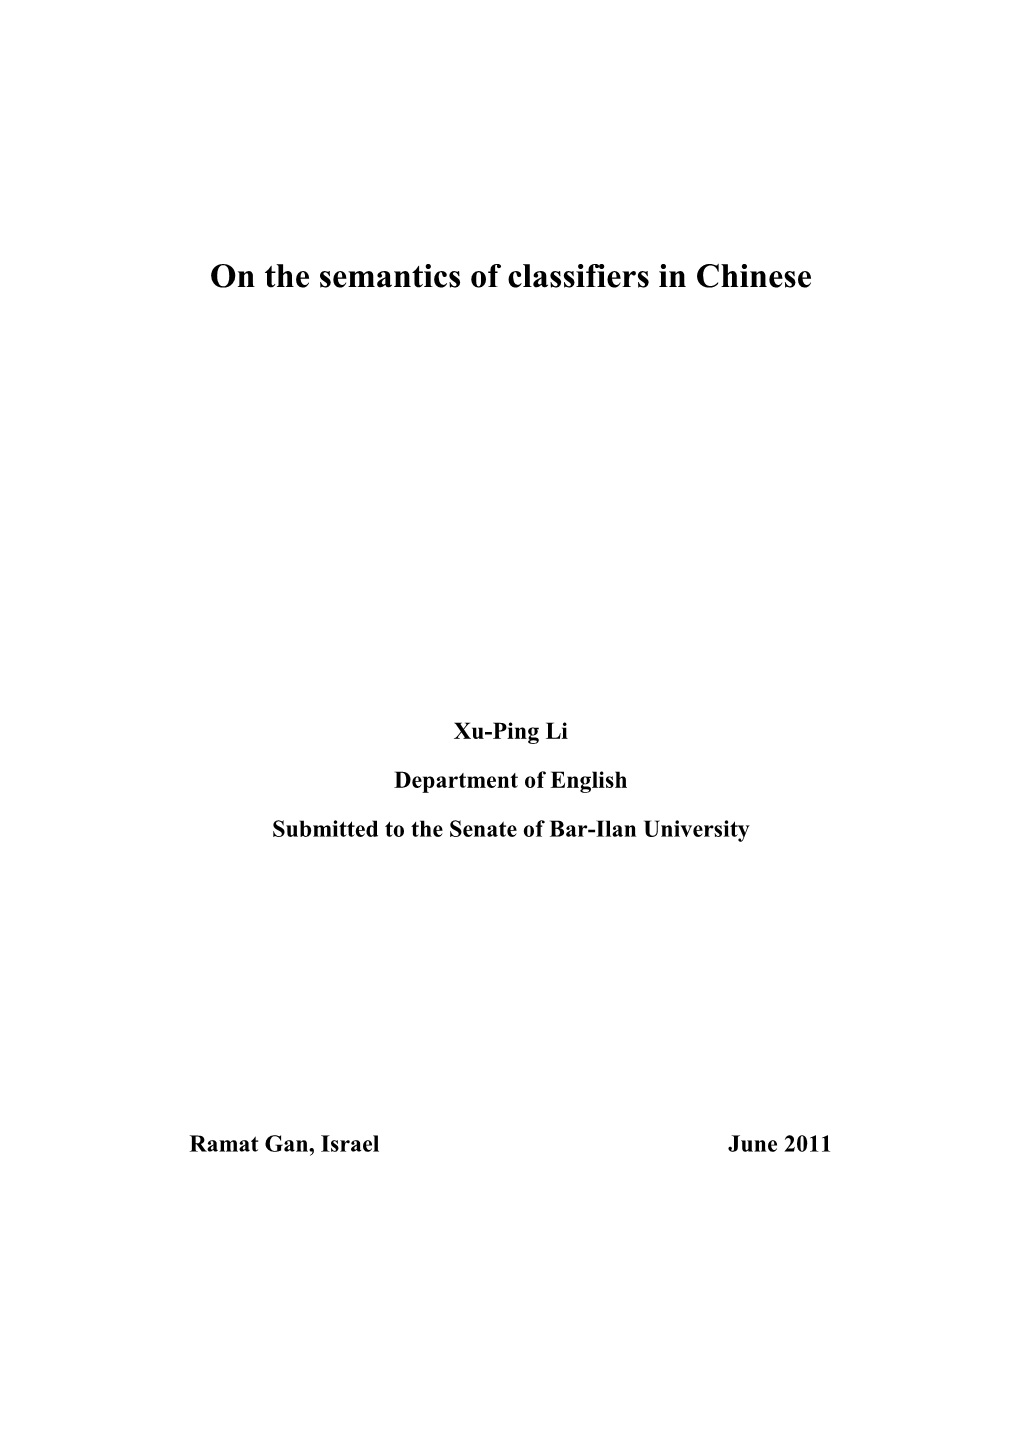 On the Semantics of Classifiers in Chinese